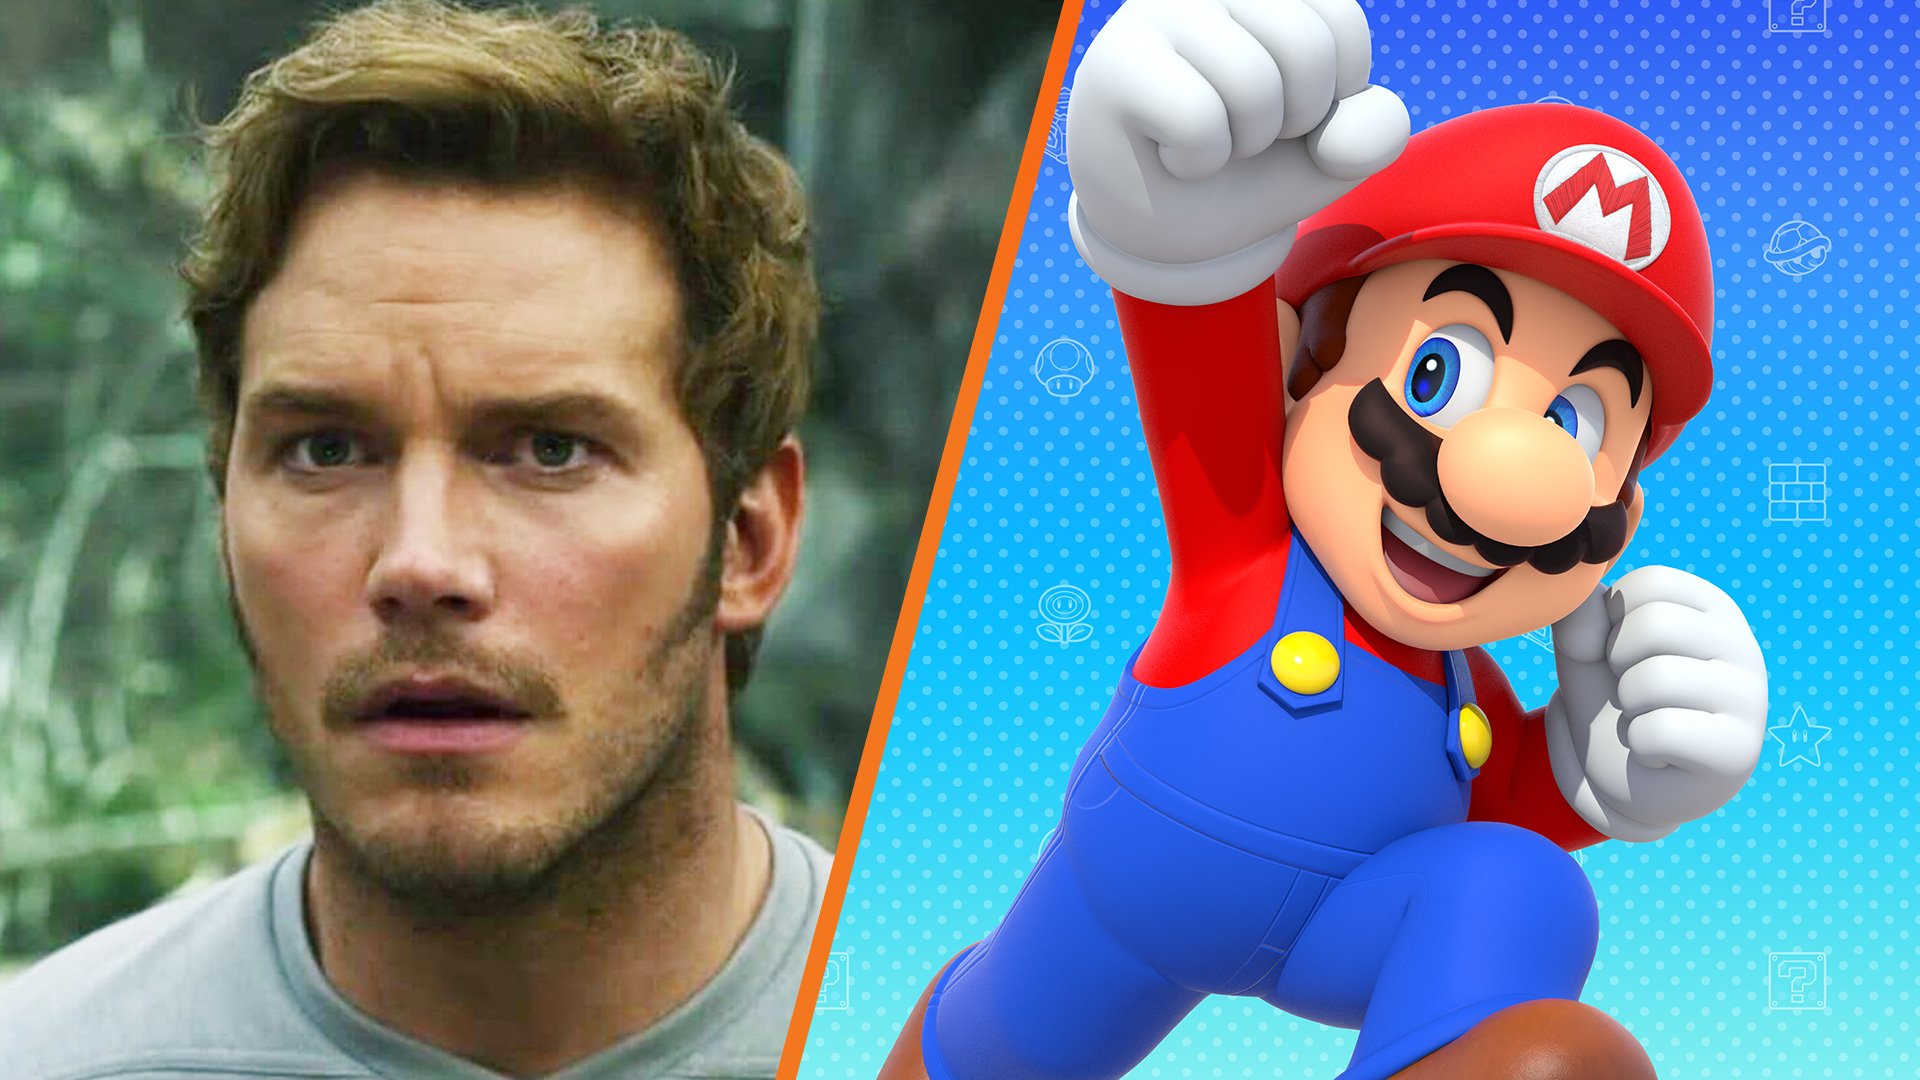 Mario Recasting Rumors Cause Debate: Should Nintendo Replace the Voice of the Iconic Game Character? 12